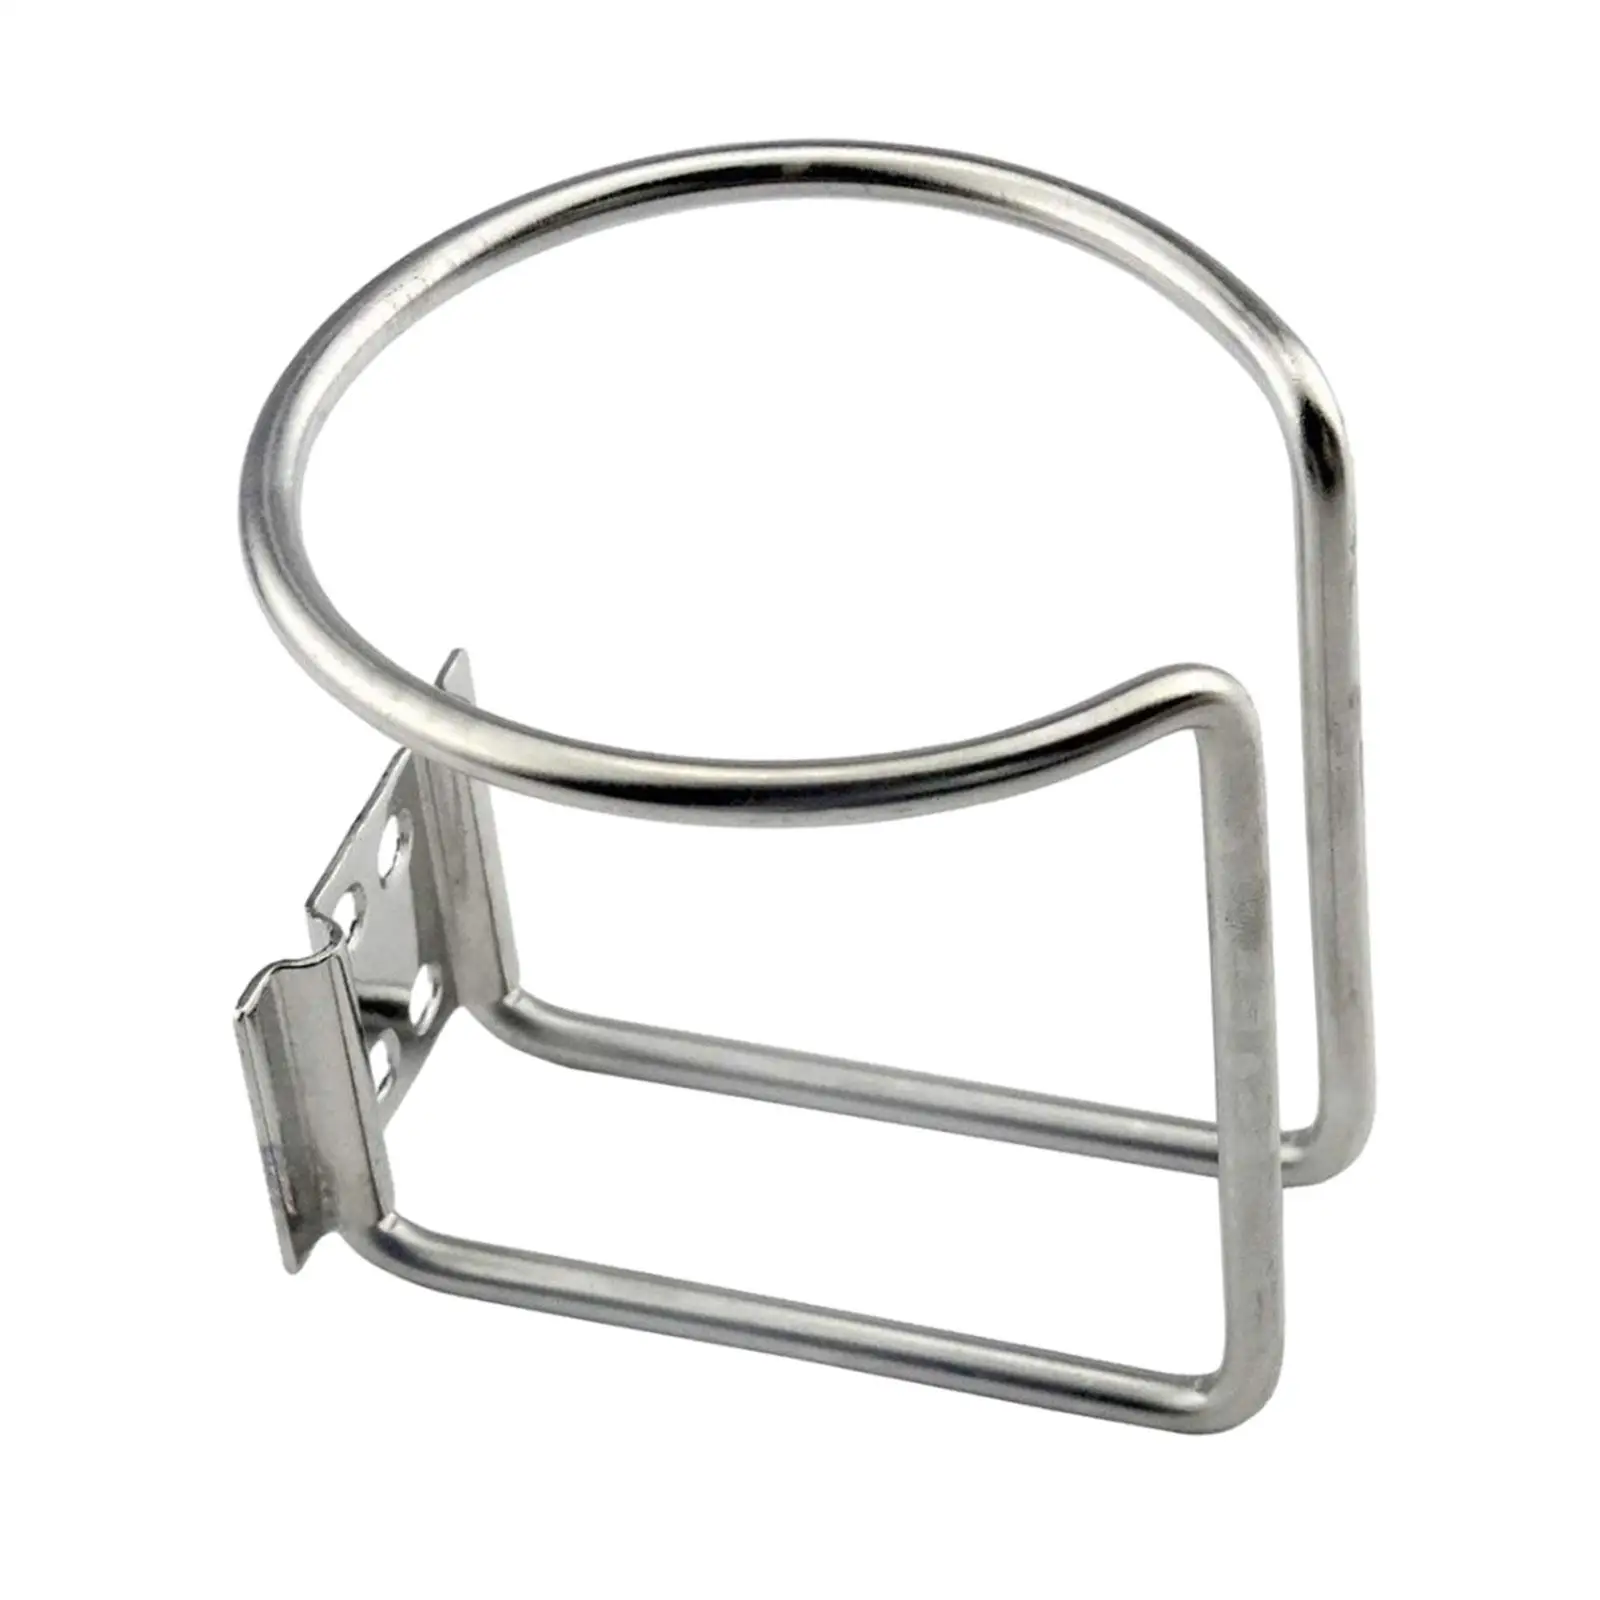 Drinks Holders Portable Stainless Steel Boat Cup Holder Wall